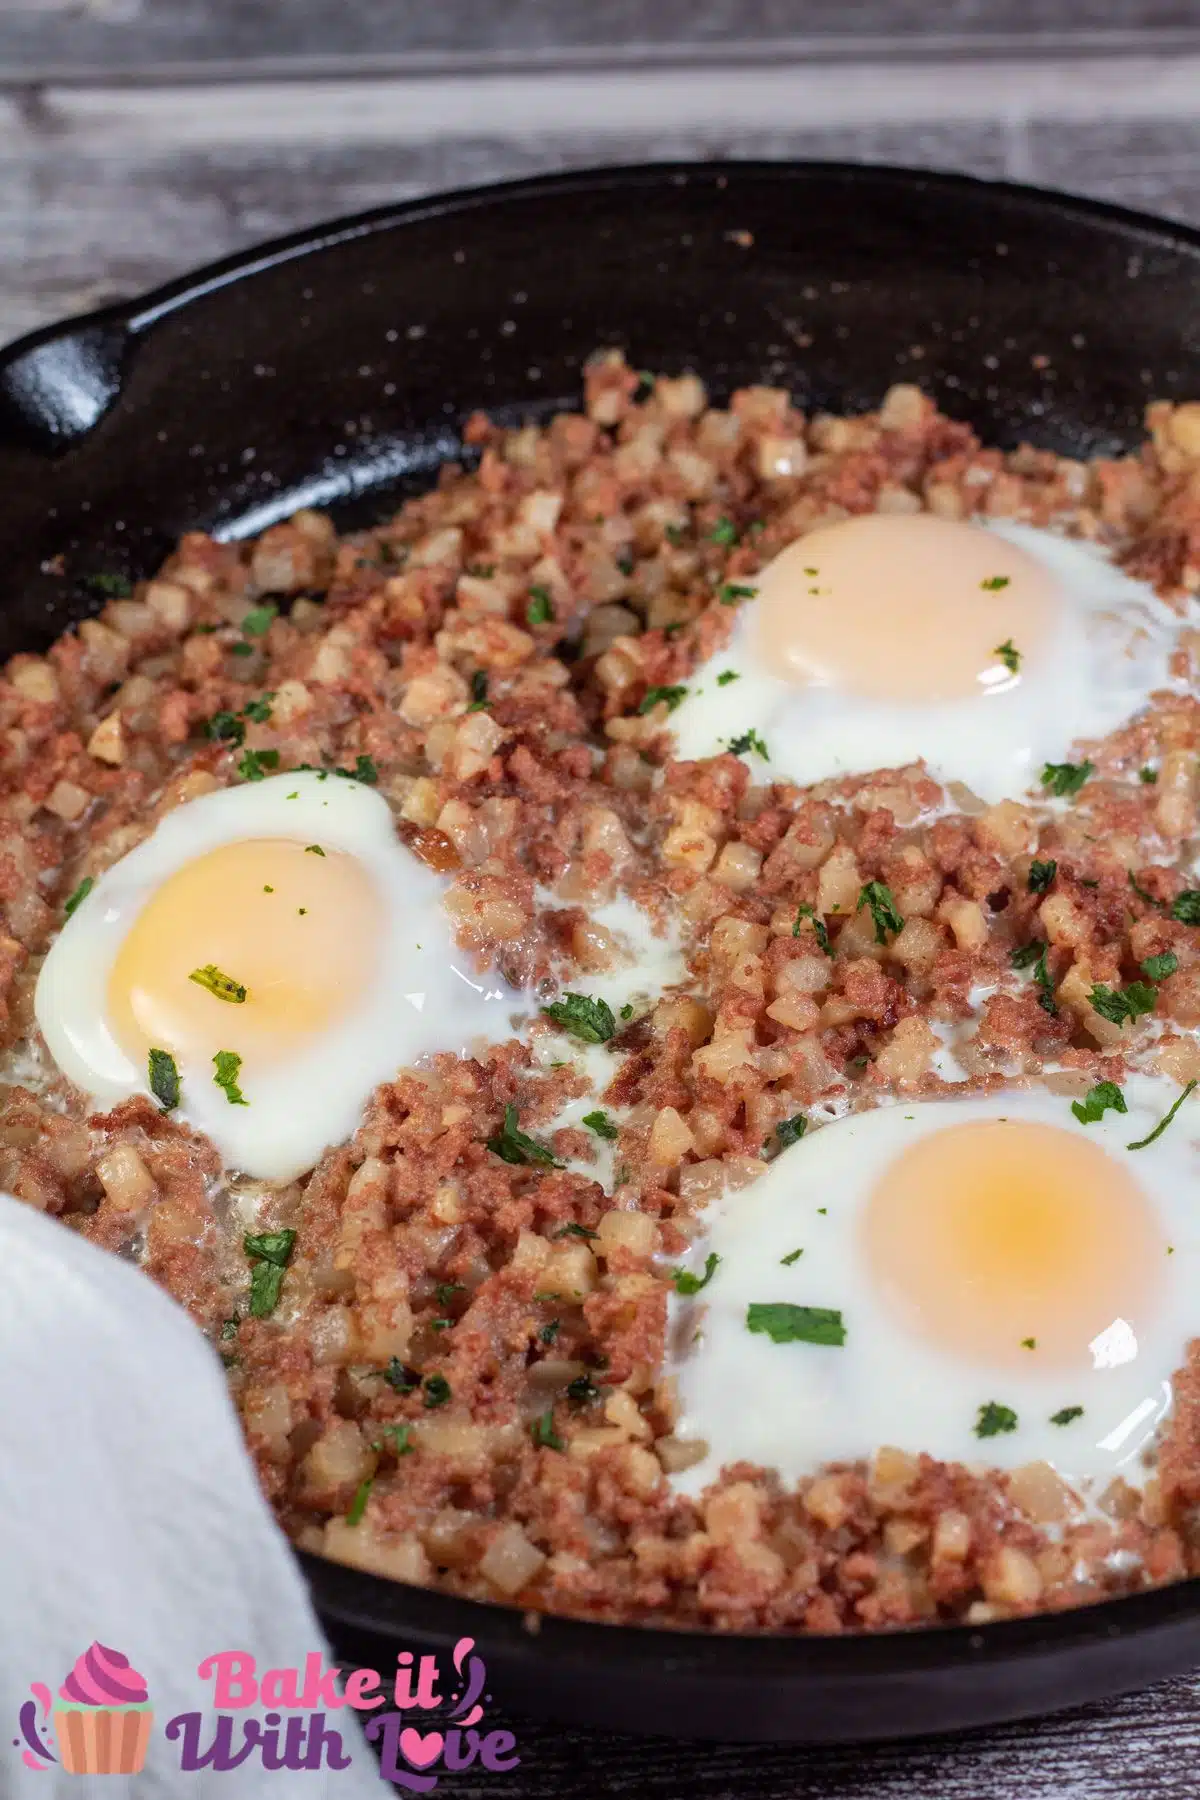 Tall image showing canned corned beef hash and eggs.